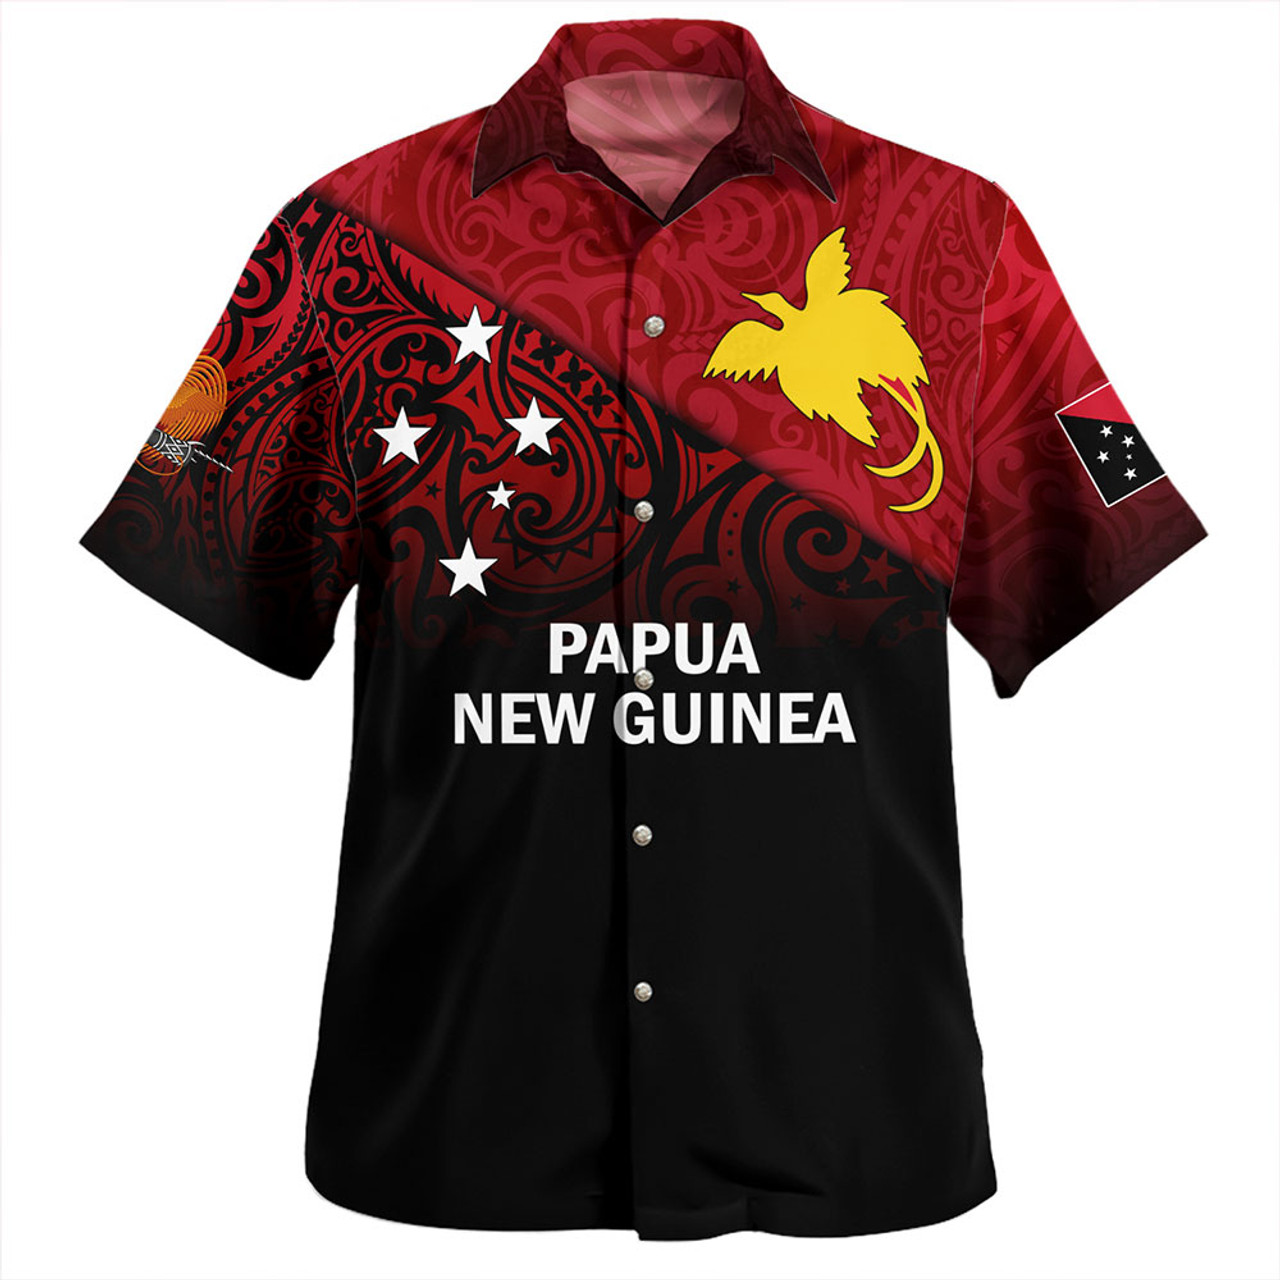 Papua New Guinea Hawaiian Shirt - PNG Flag Color With Traditional Patterns